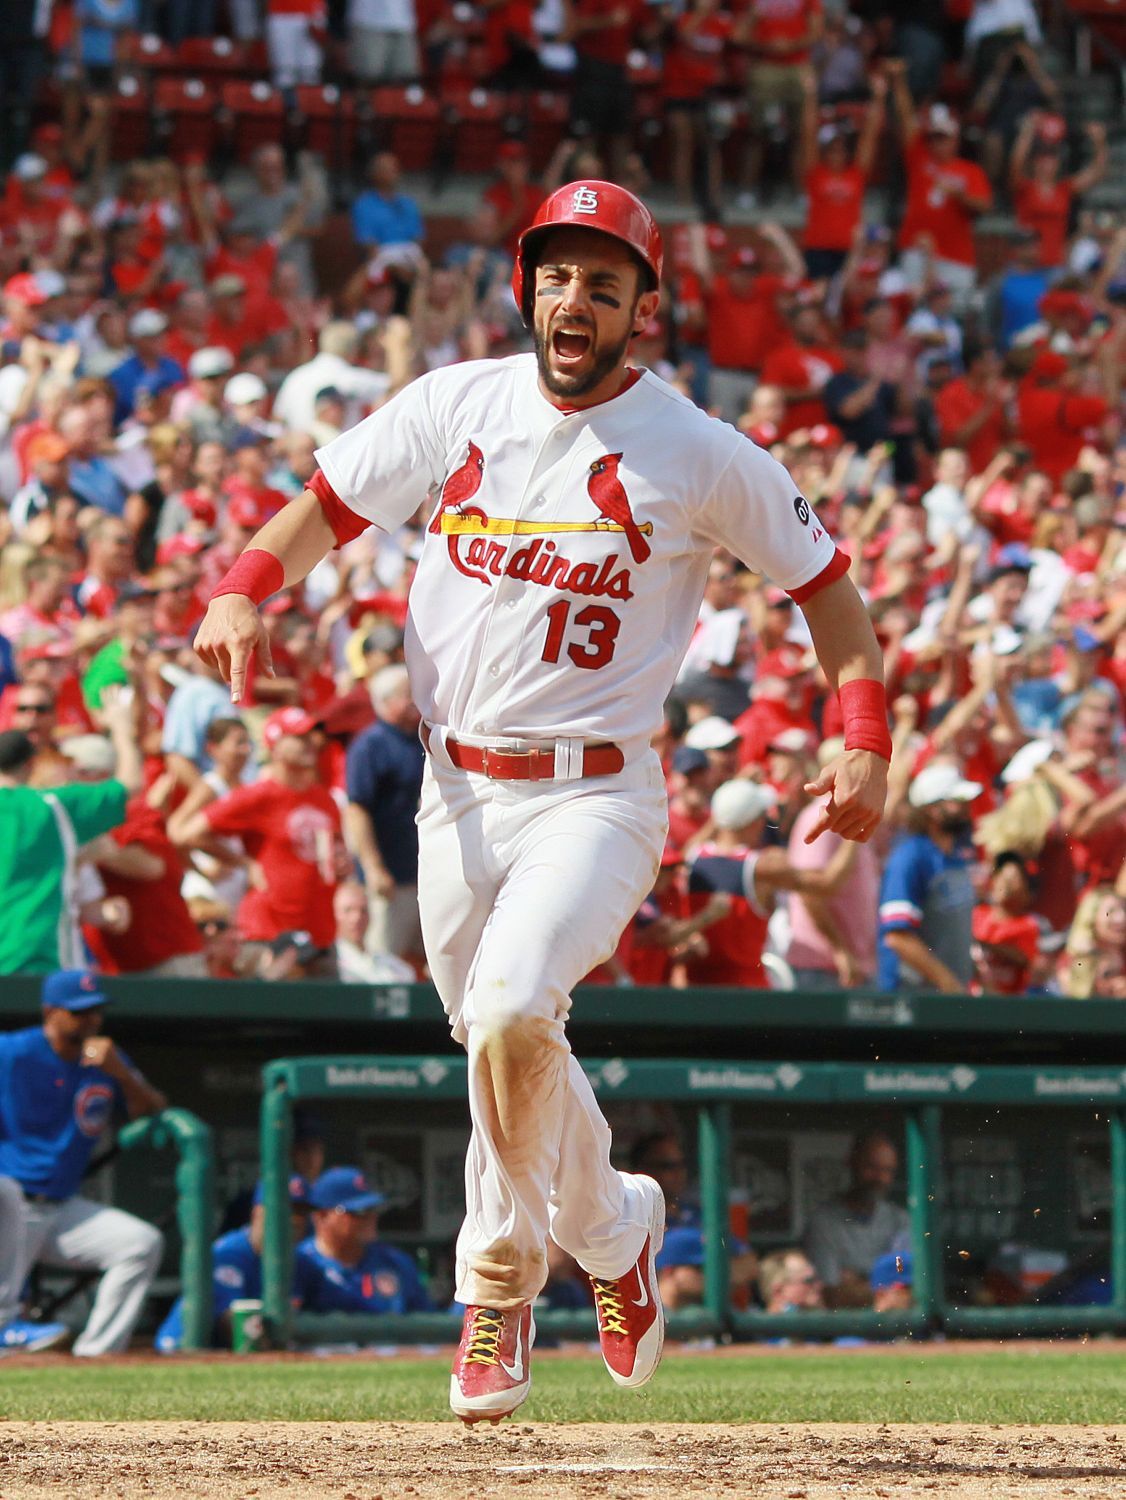 Cards come back against Cubs 4-3 | St. Louis Cardinals | www.semadata.org